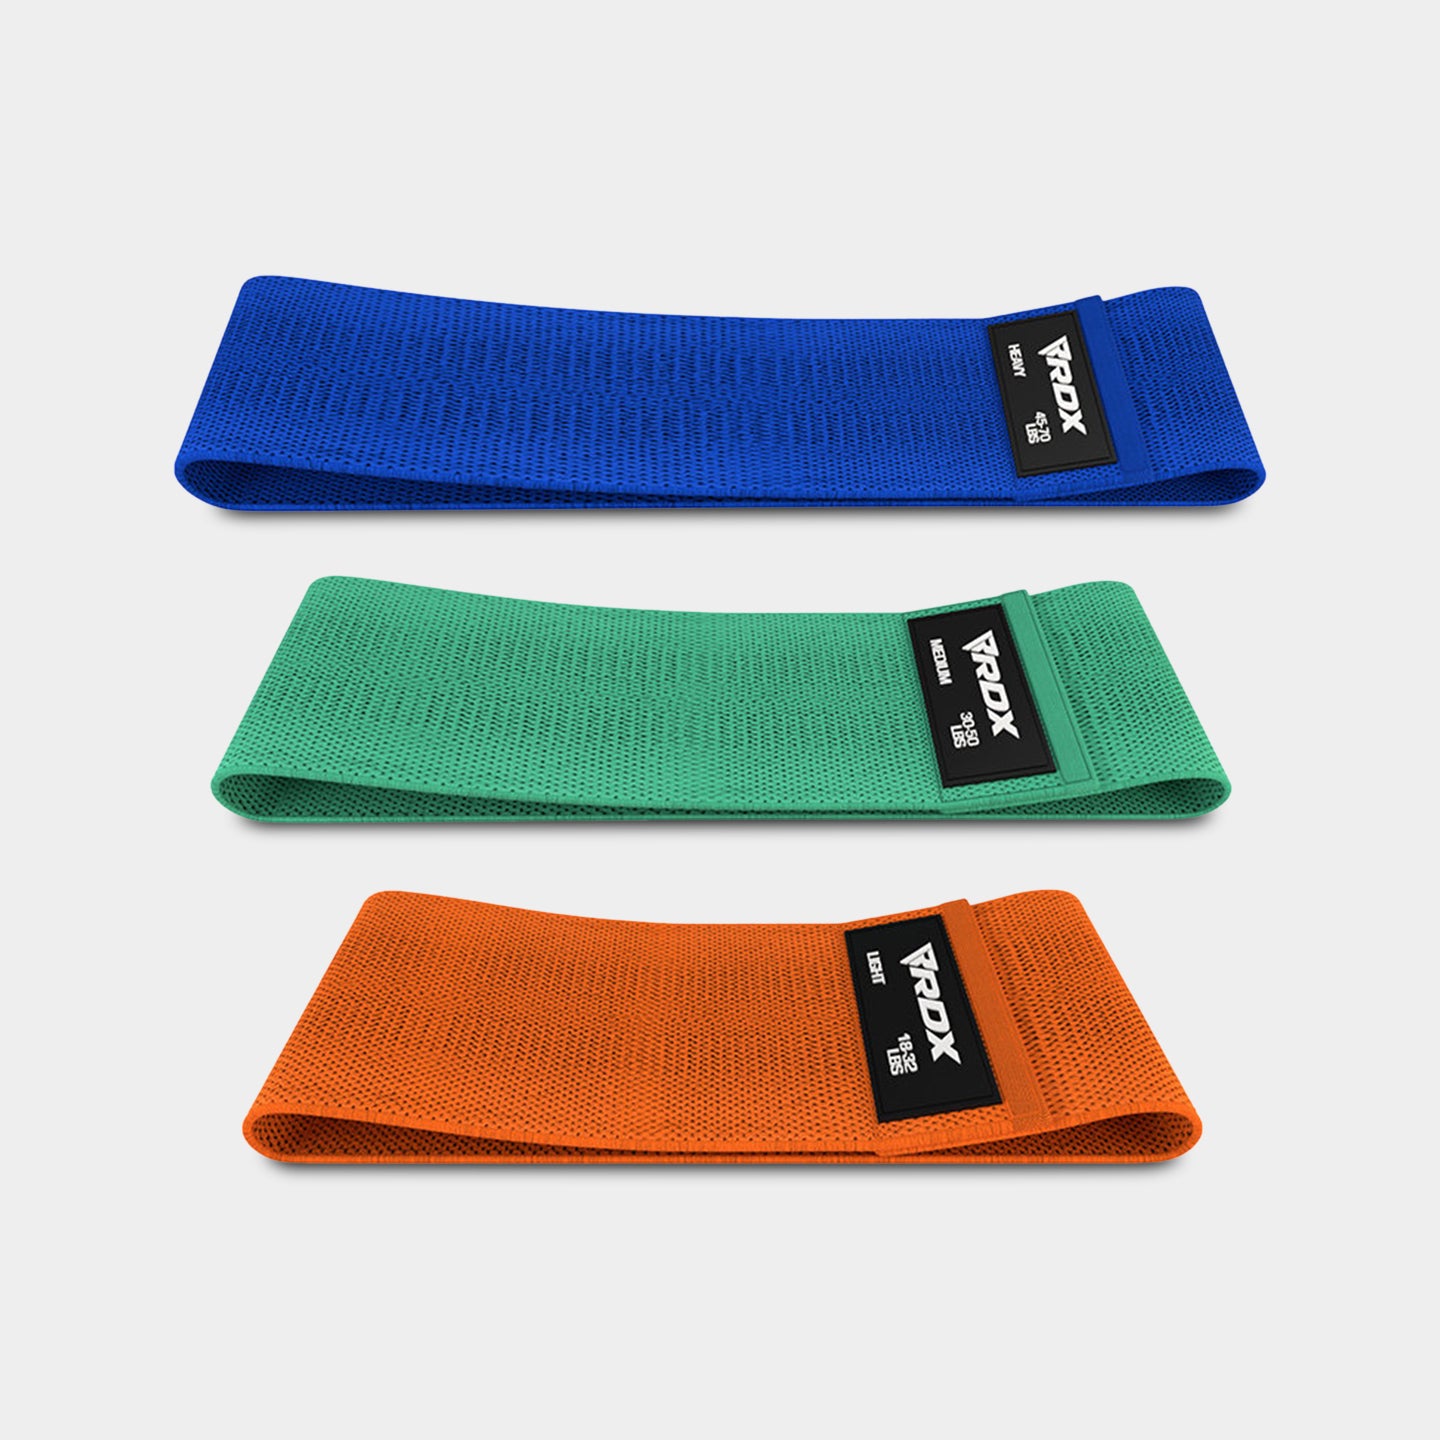 RDX Sports Heavy-Duty Fabric Resistance Training Bands for Fitness, Standard Size, Blue/Green/Orange A1